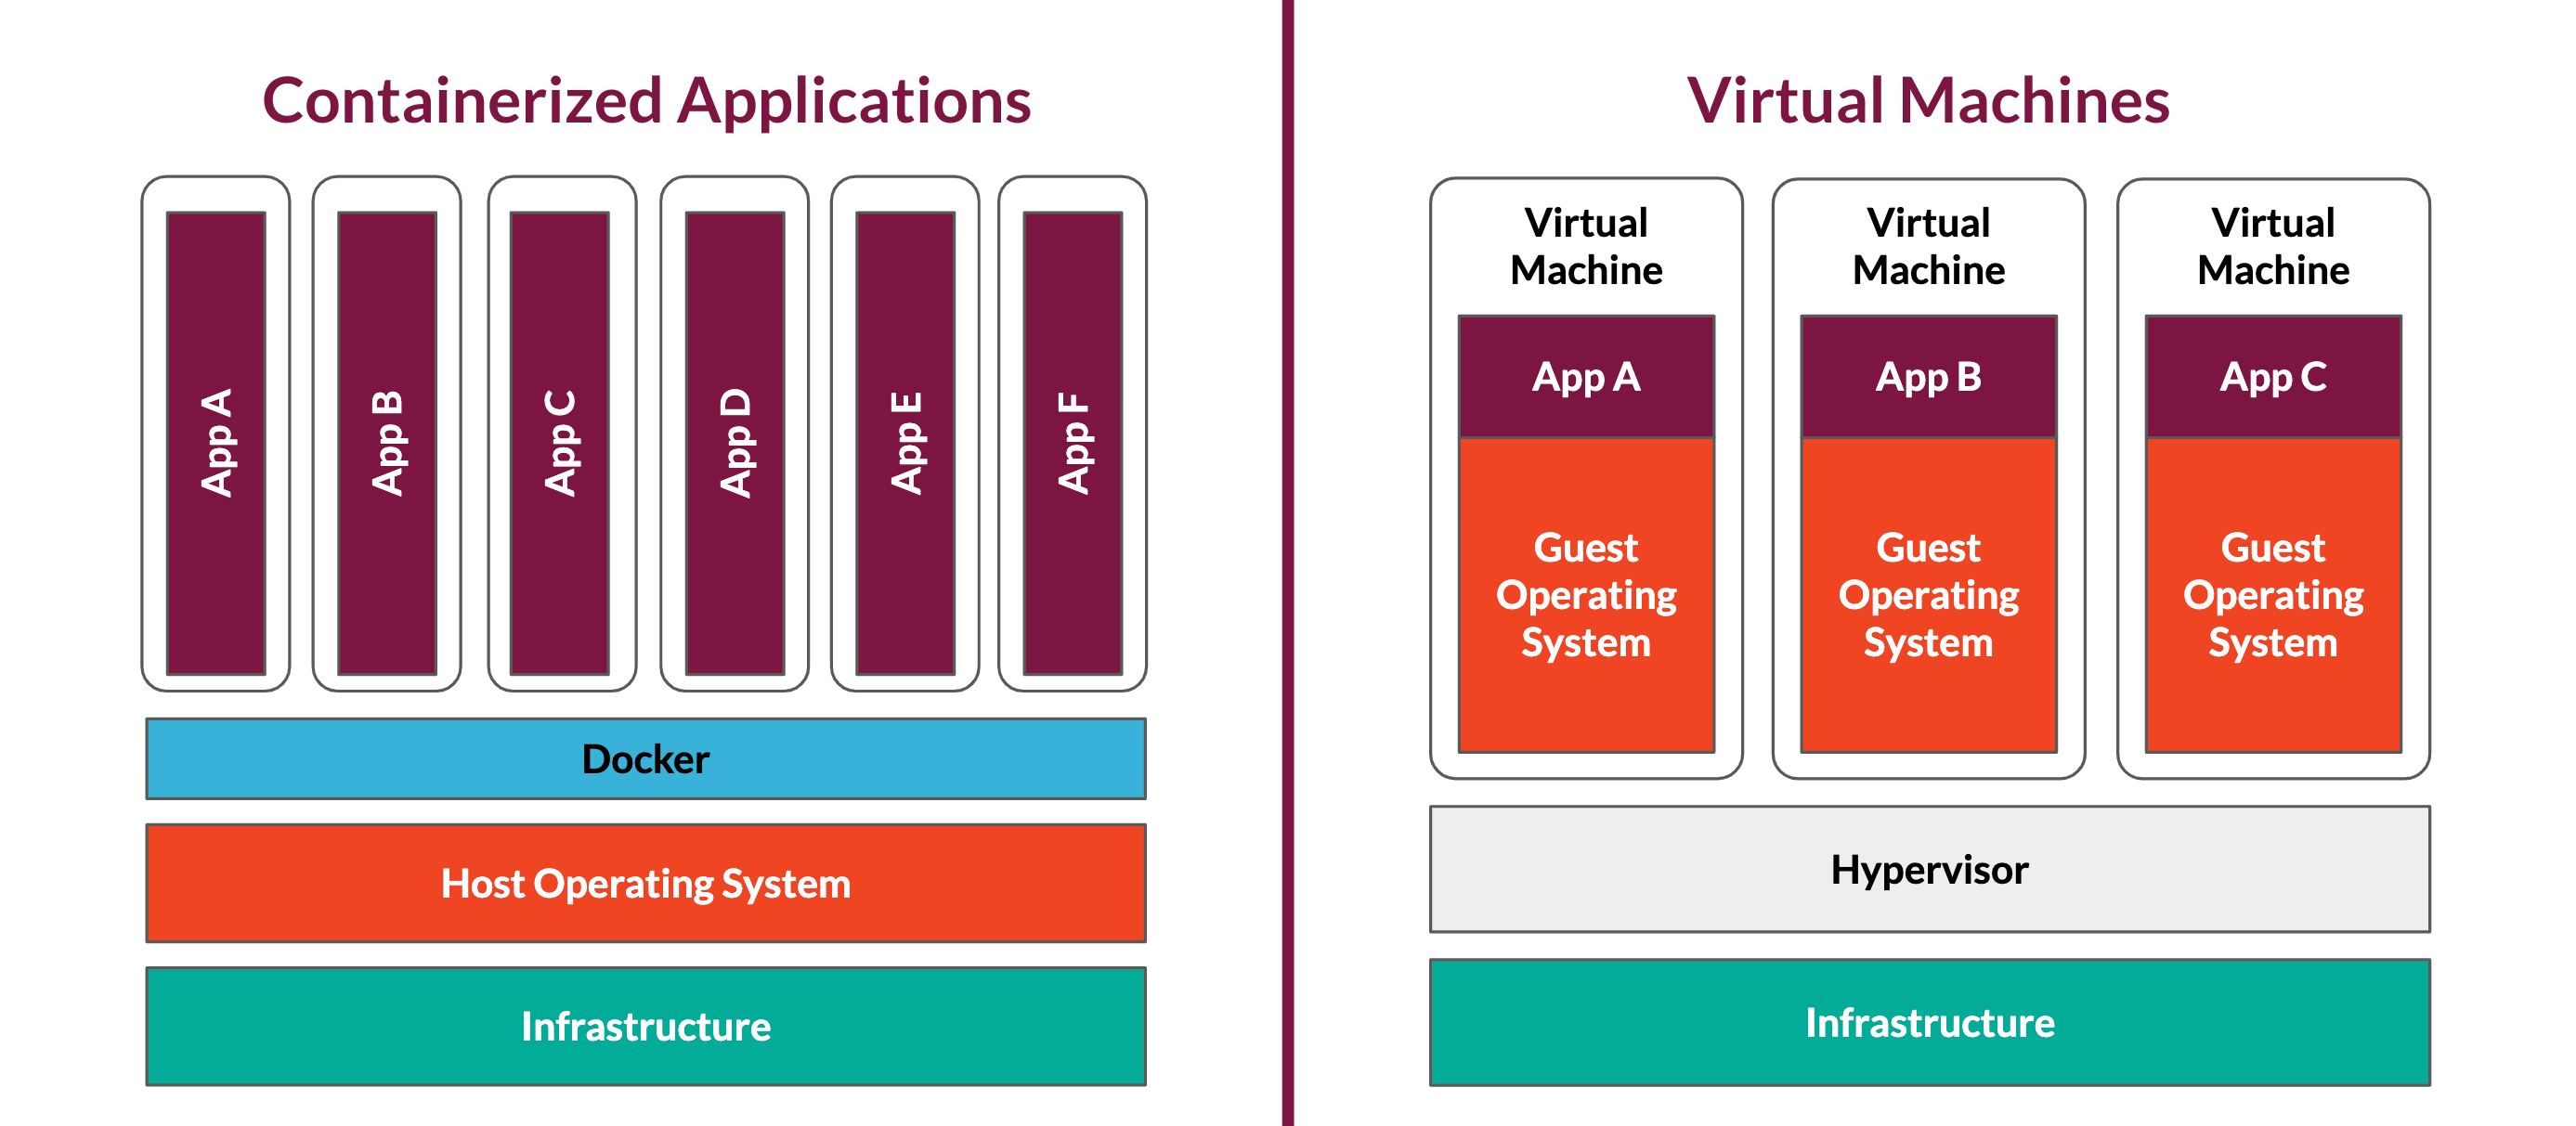 Comparison of virtual machines and containers